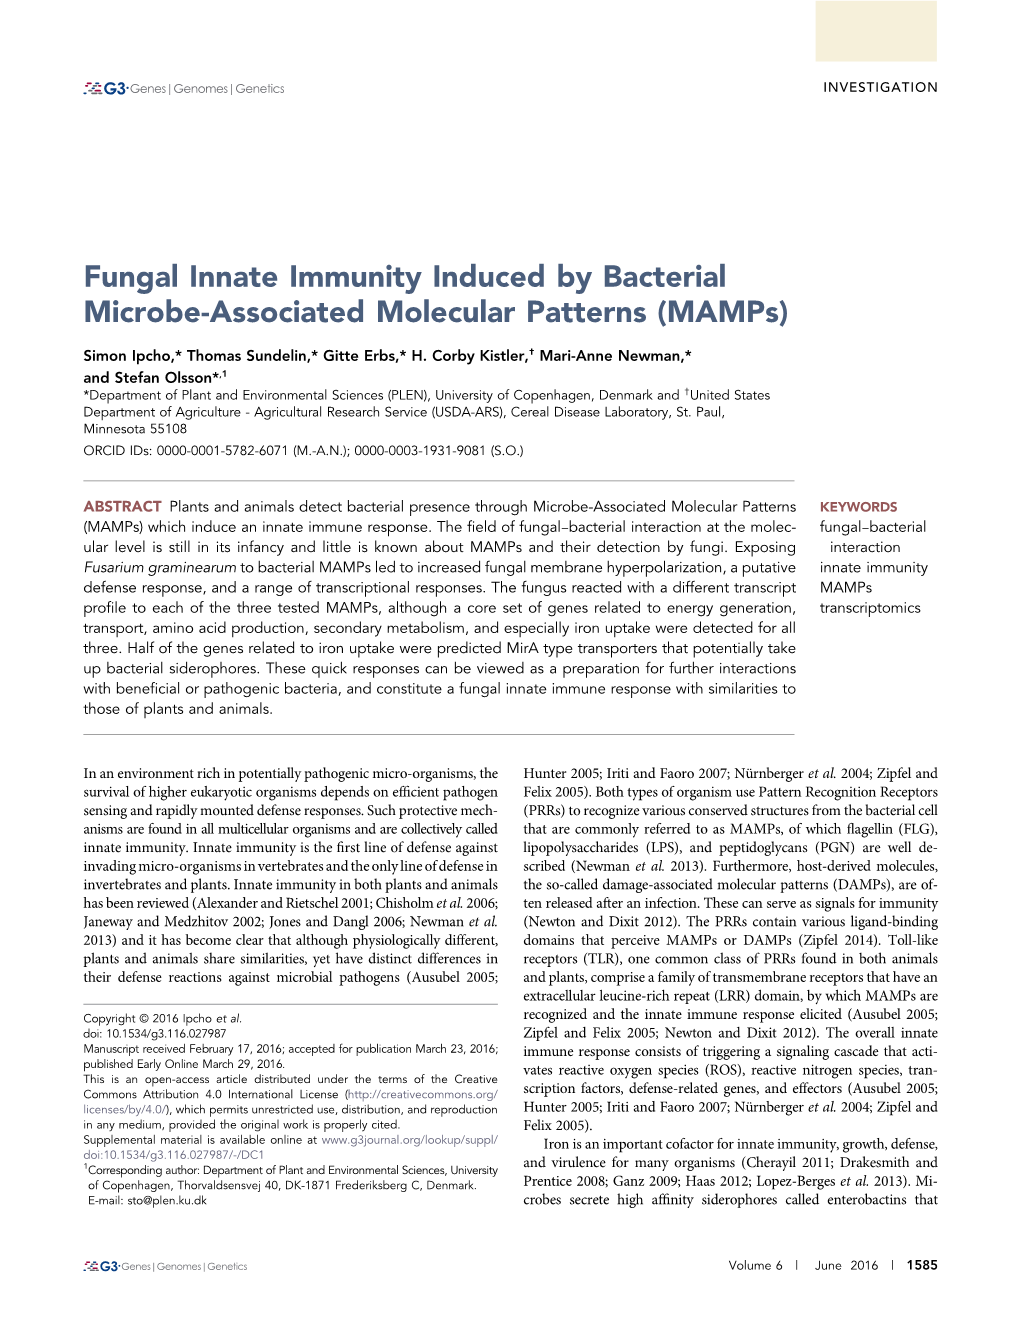 Fungal Innate Immunity Induced by Bacterial Microbe-Associated Molecular Patterns (Mamps)